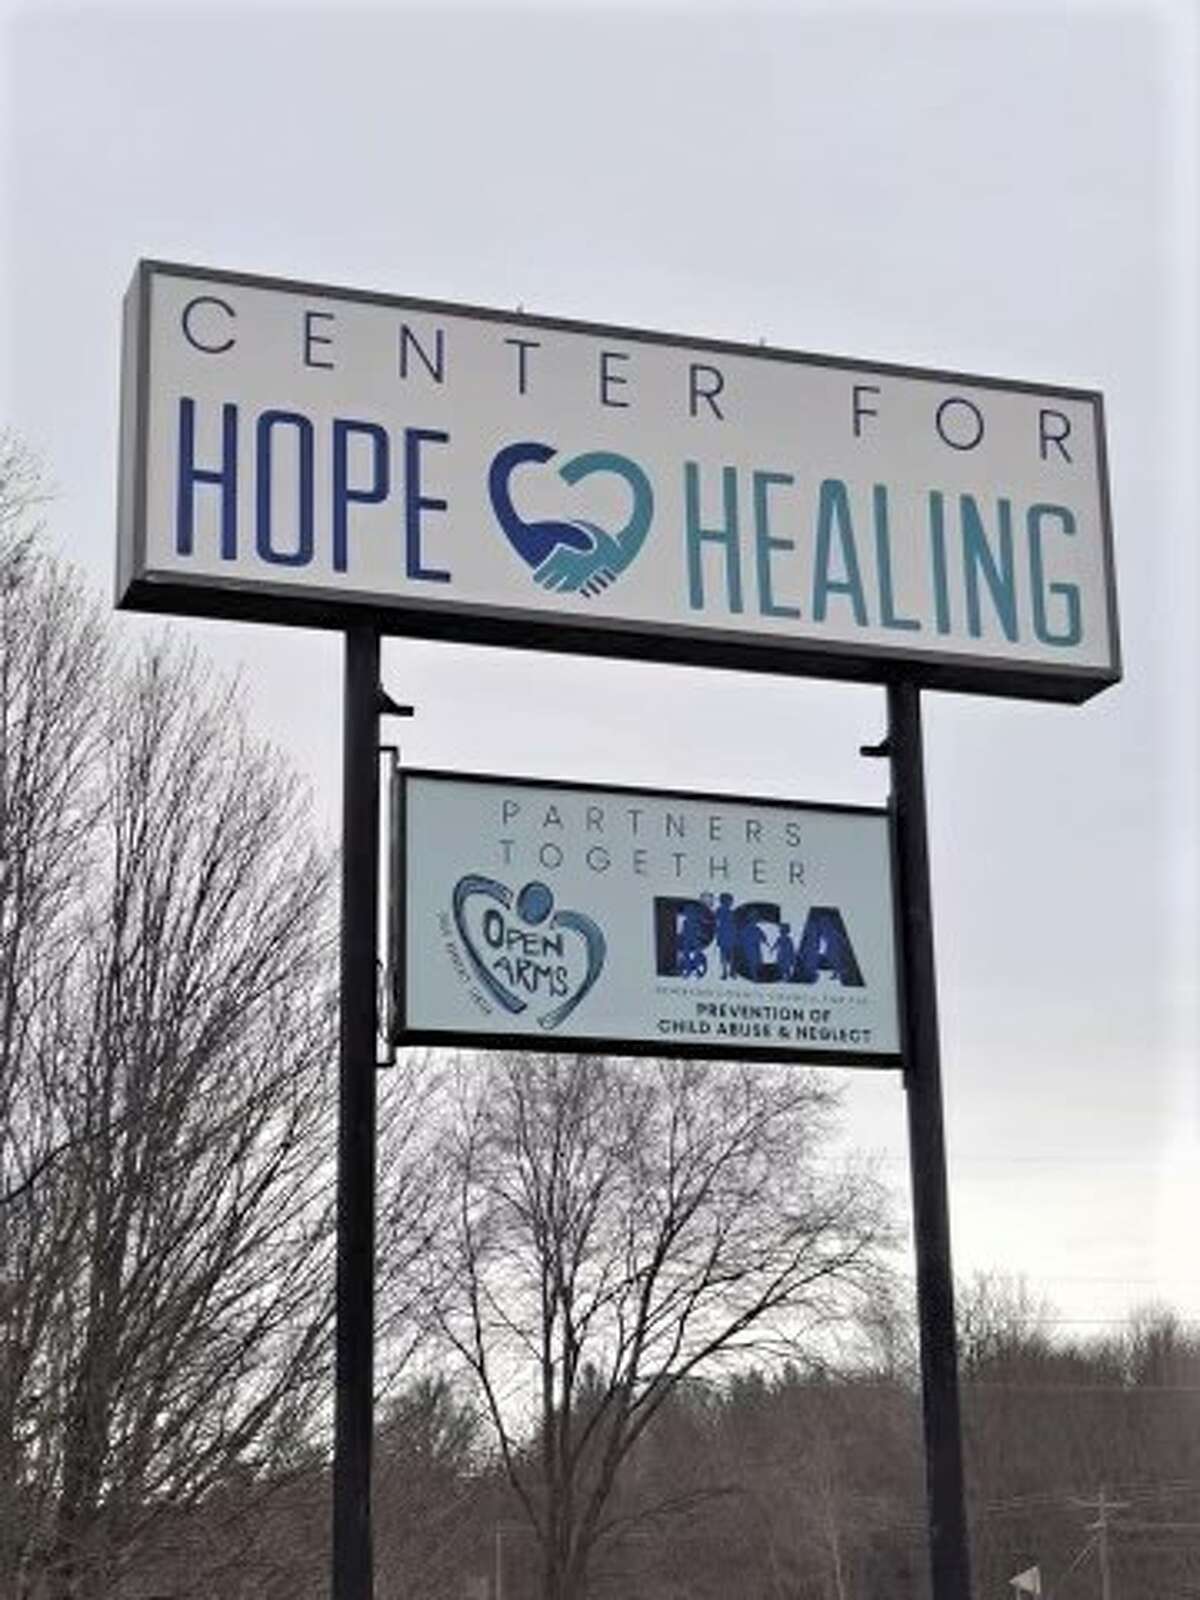 Open Arms Child Advocacy Center in Big Rapids is joining forces with the Newaygo County Prevention of Child Abuse and Neglect in opening a new facility in White Cloud called the Center for Hope and Healing that will house both organizations